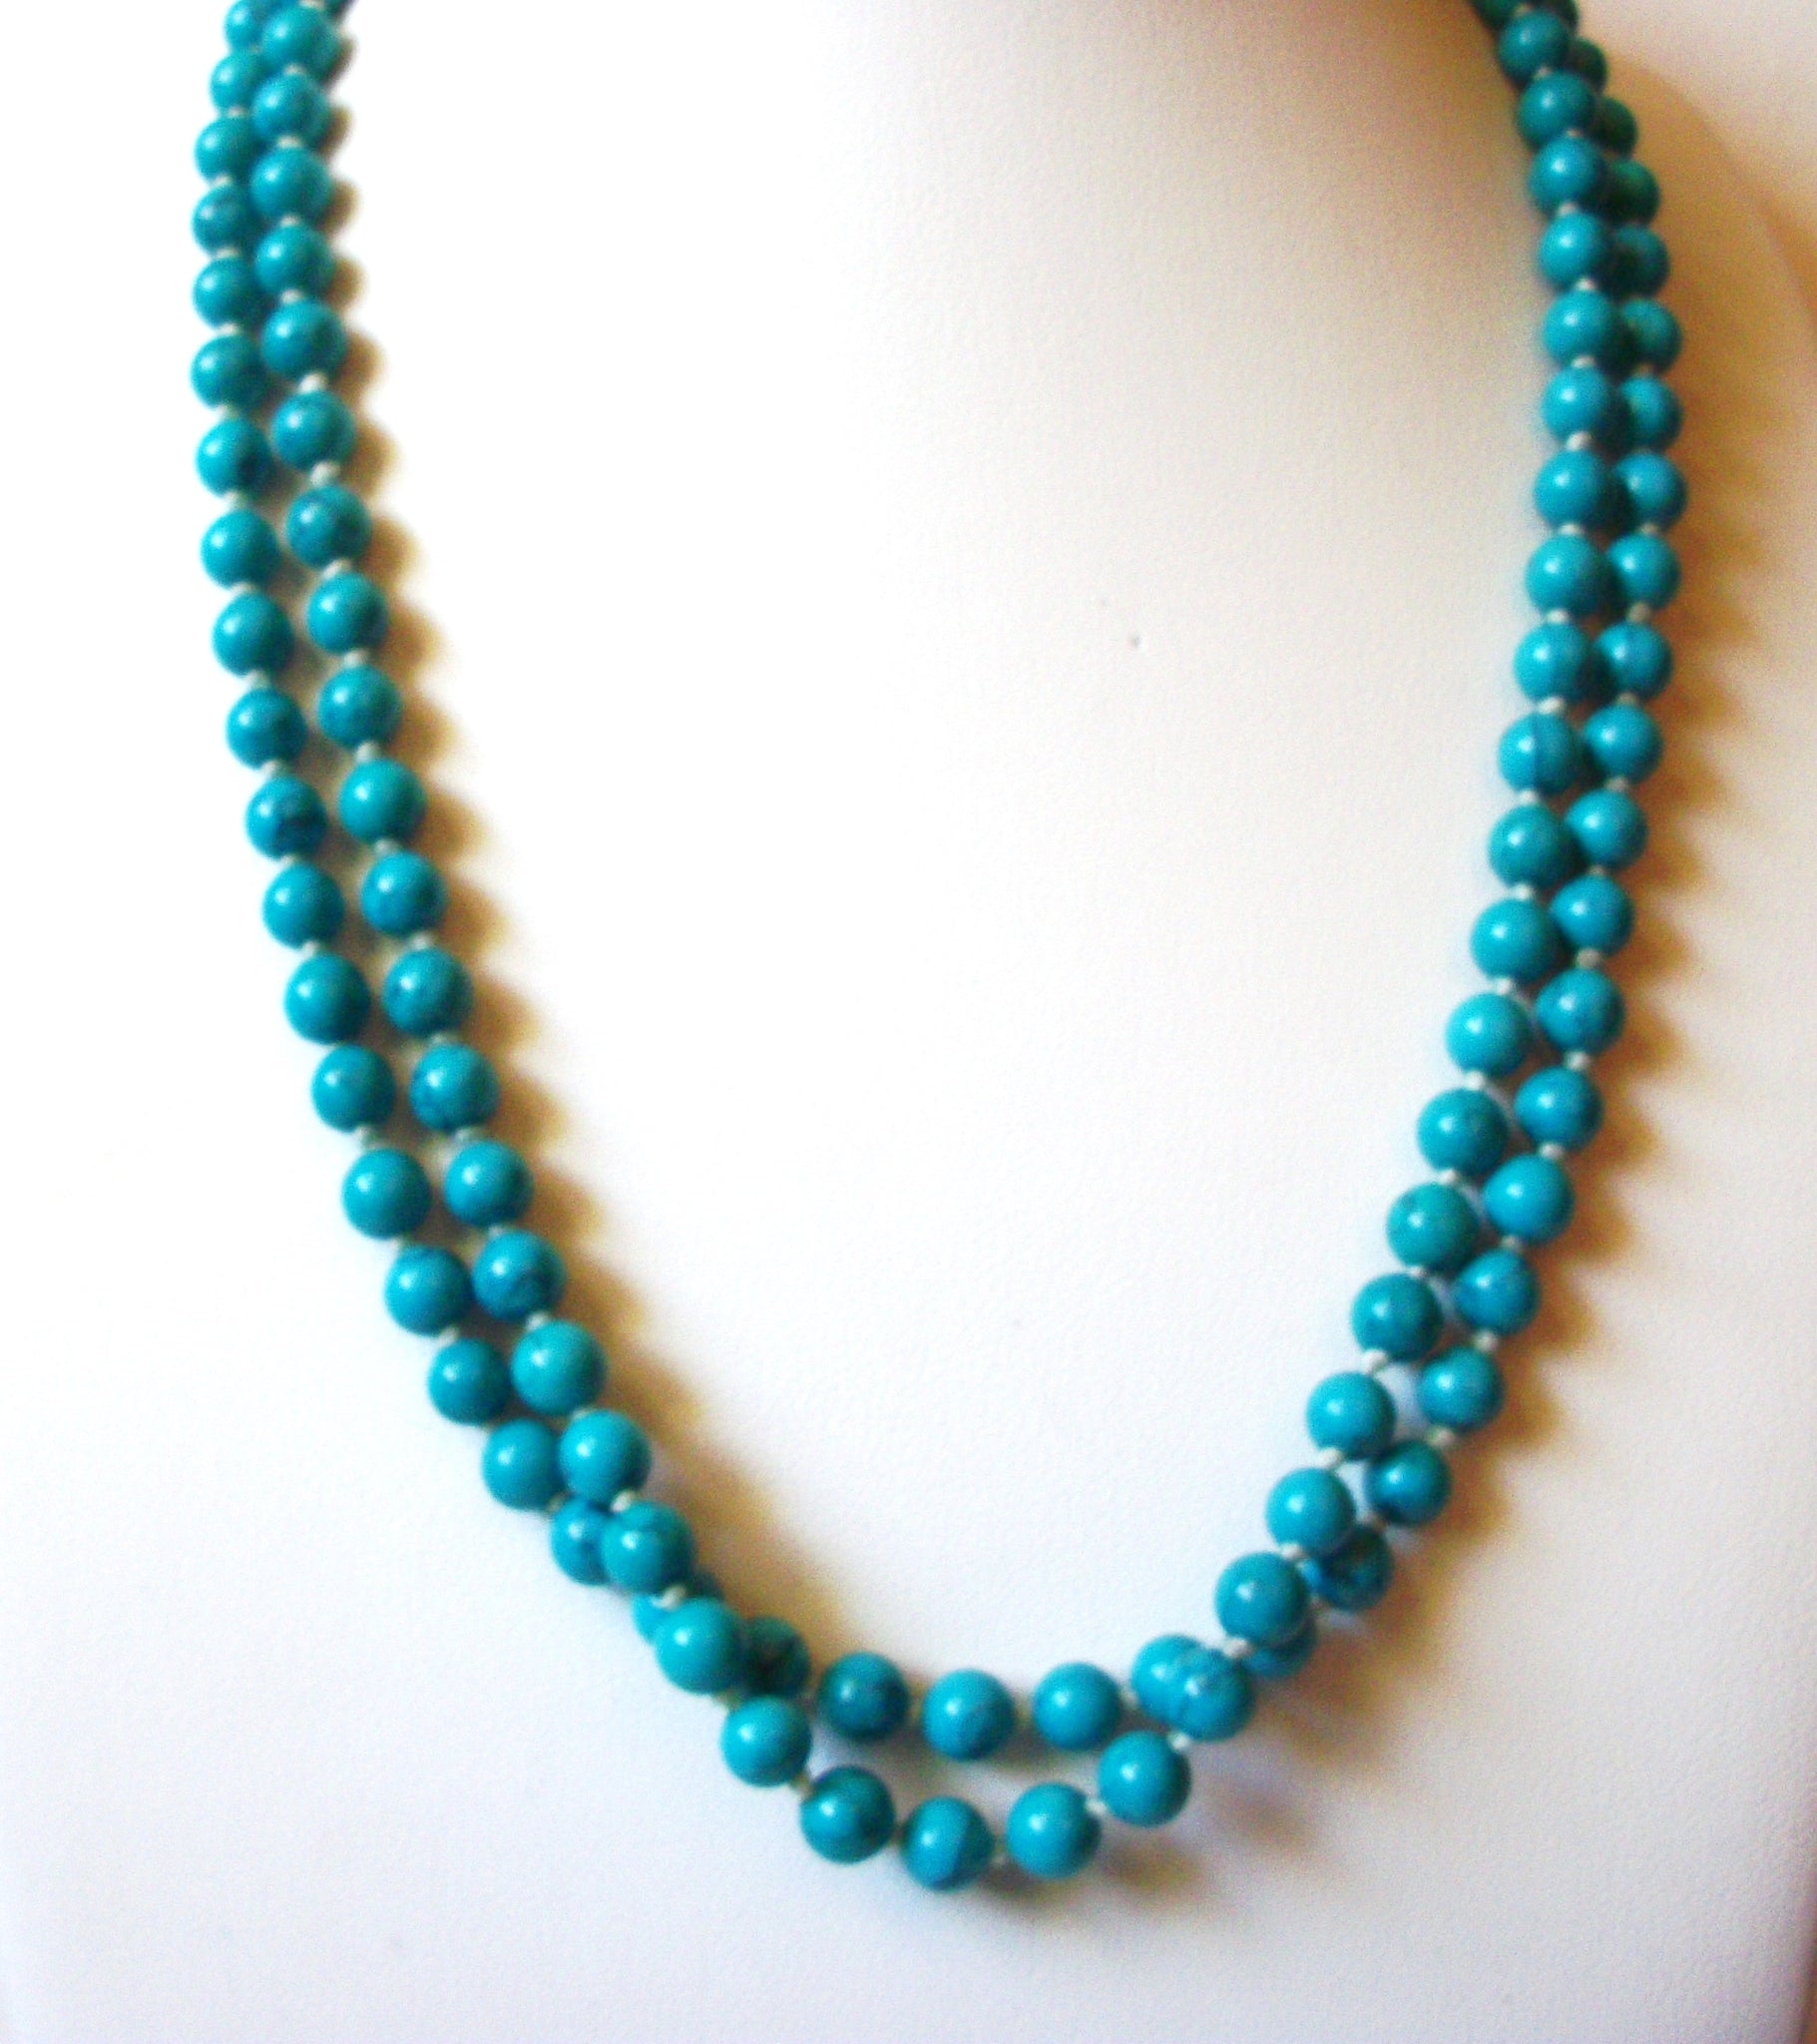 Vintage Turquoise Glass Necklace 82820